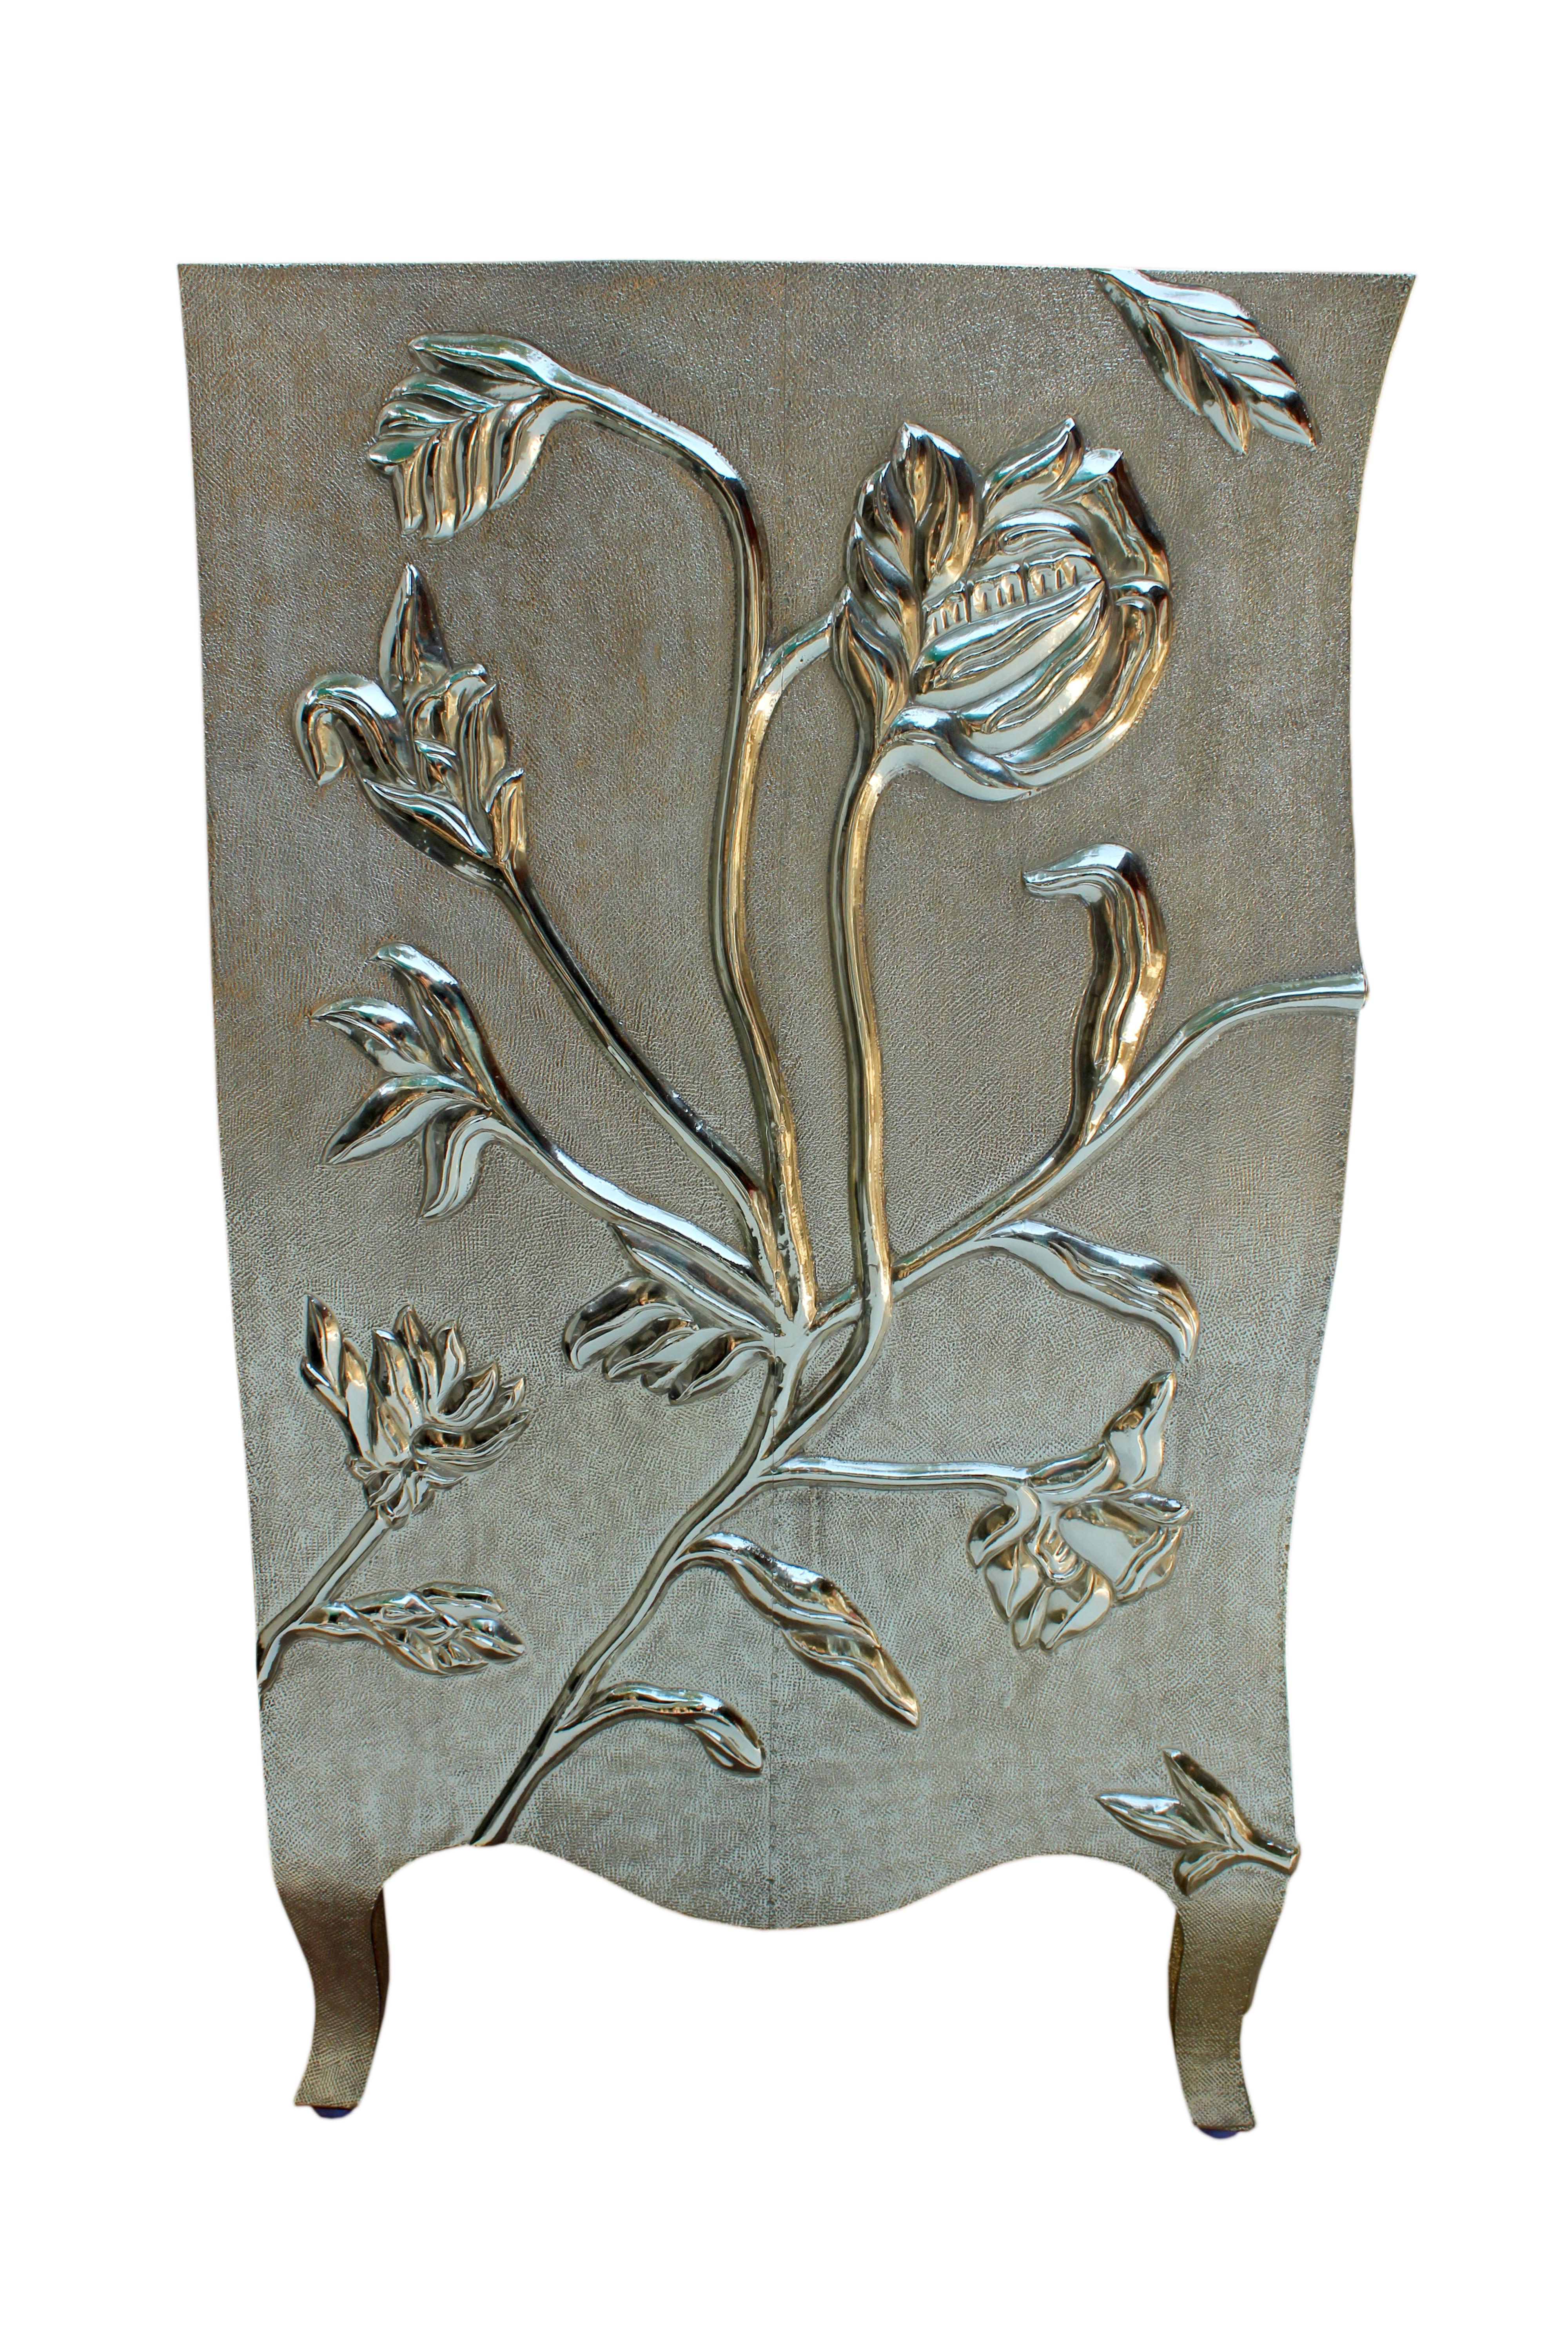 Hammered Louise Floral Credenza in Brass Clad Over Wood Handcrafted in India For Sale